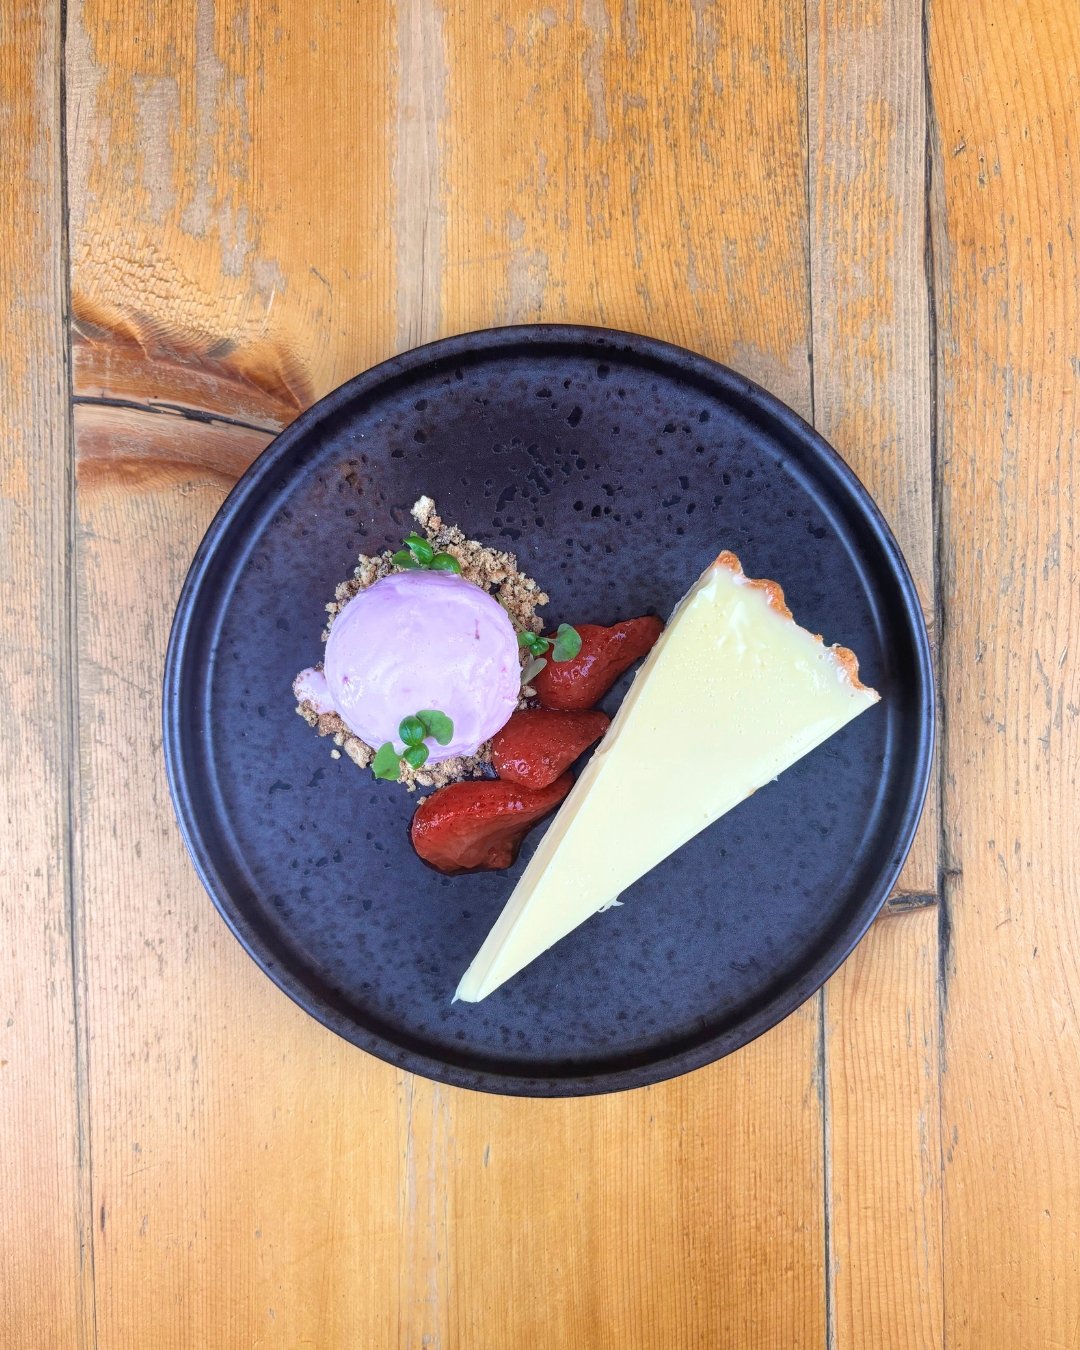 White chocolate tart, macerated balsamic strawberries, basil, strawberry ice cream 🍓

🍲 Check out our menu and book a table (links in bio)